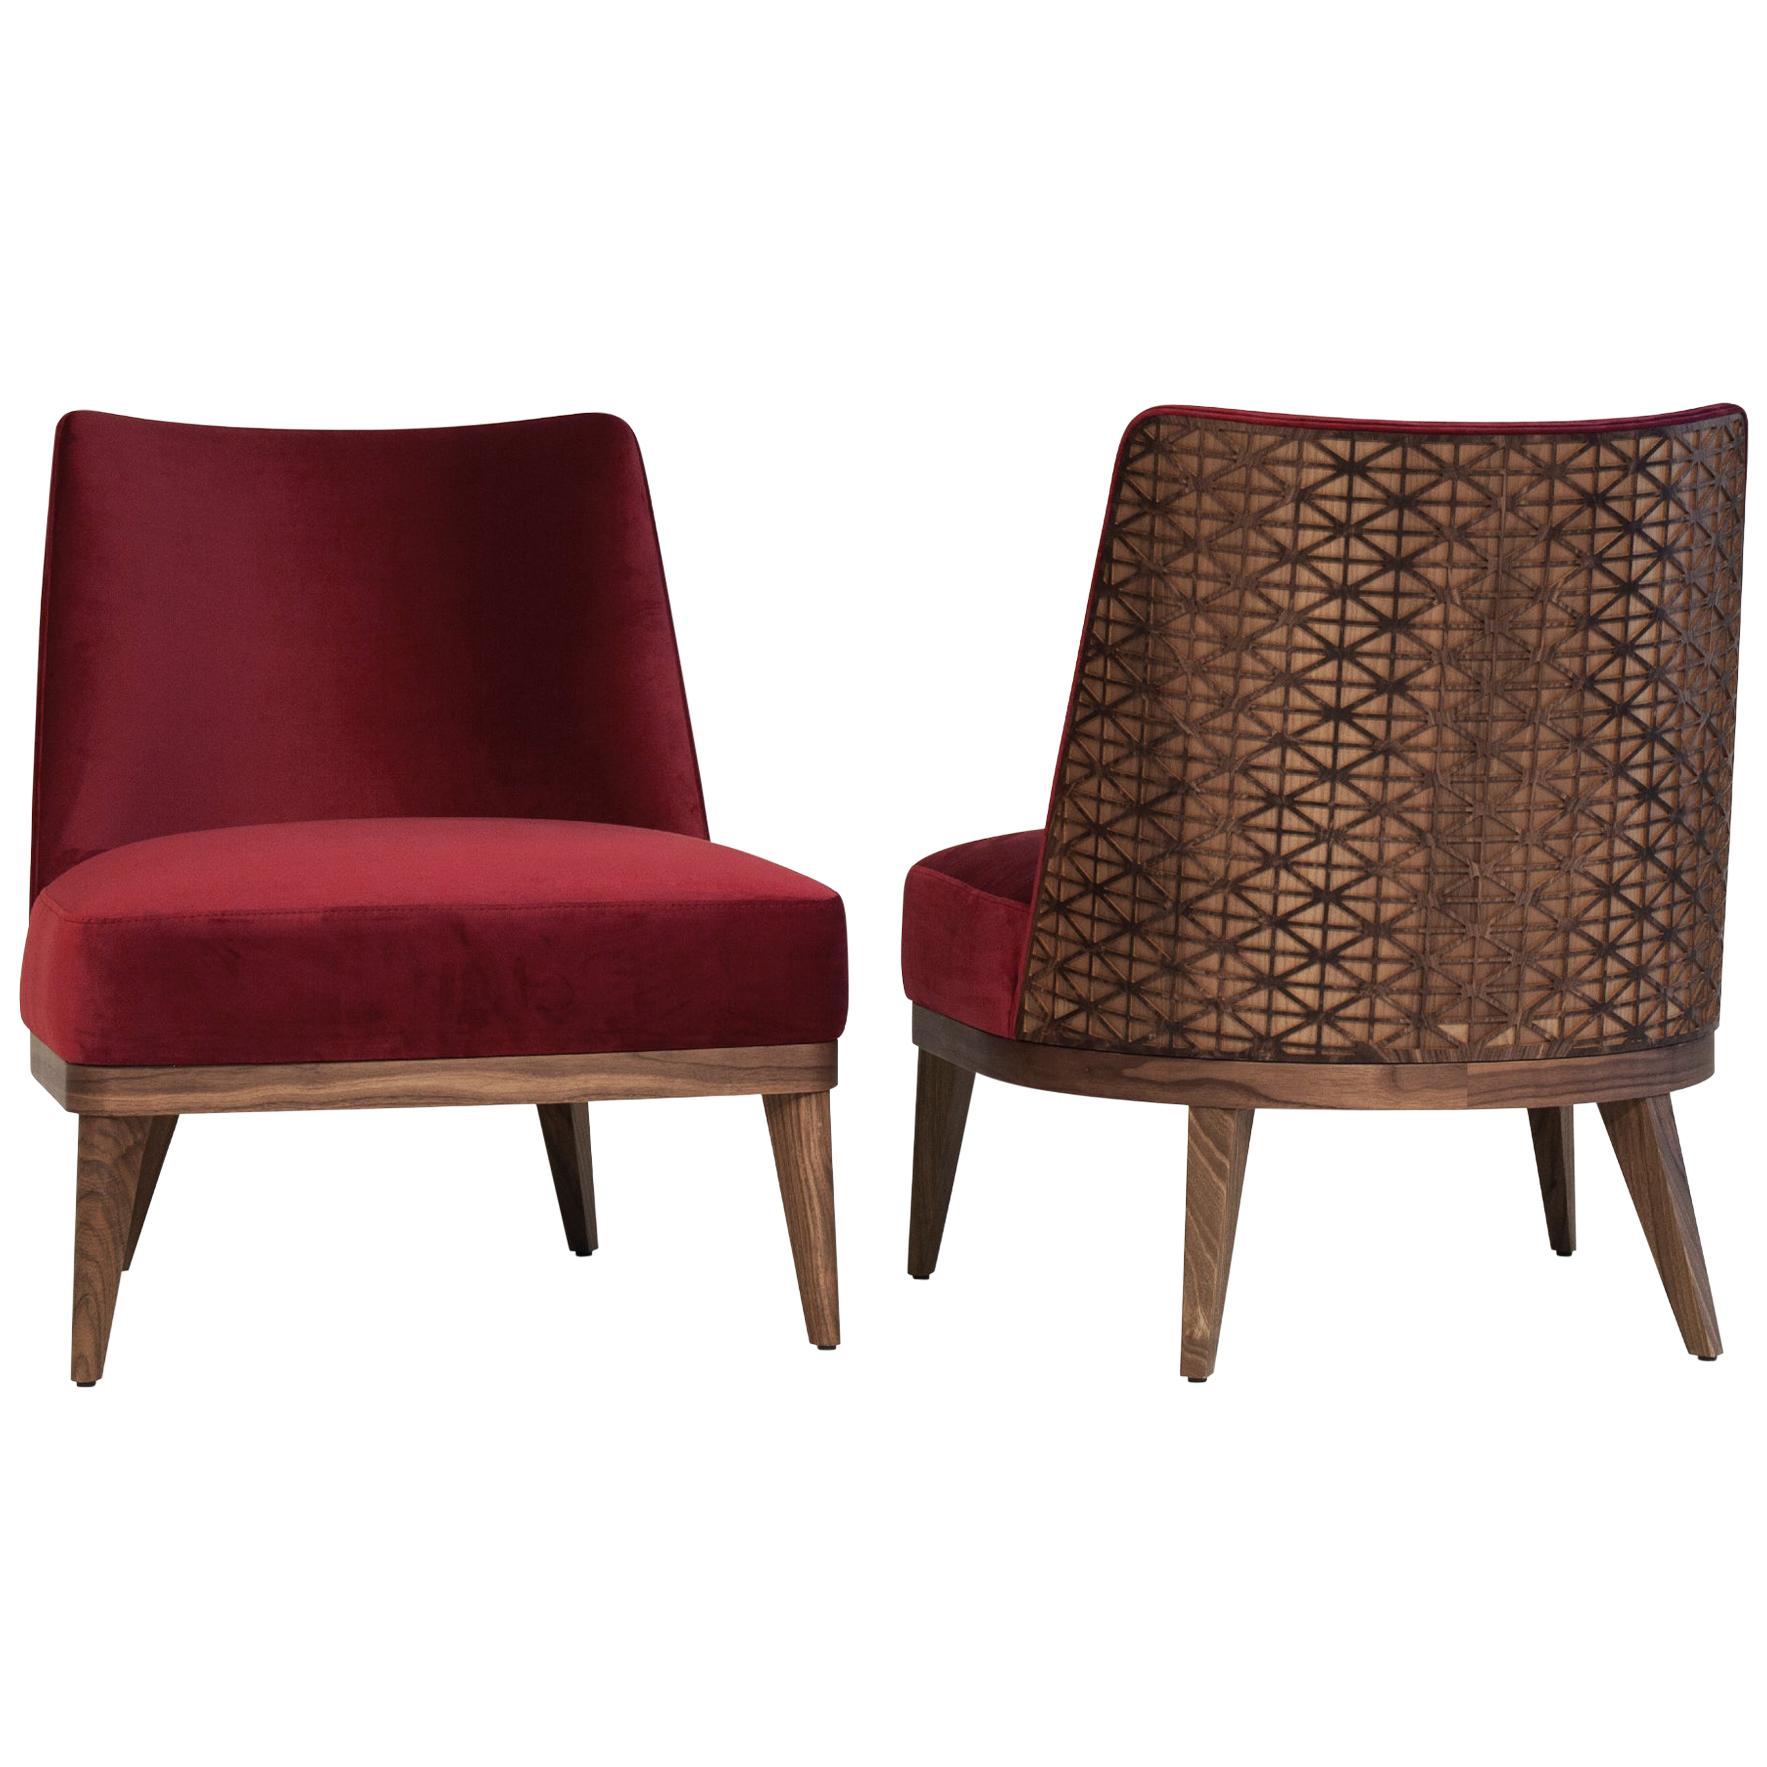 Fez Lounge Chair, Wood Patterned Backing Upholstered in Red Velvet Chair